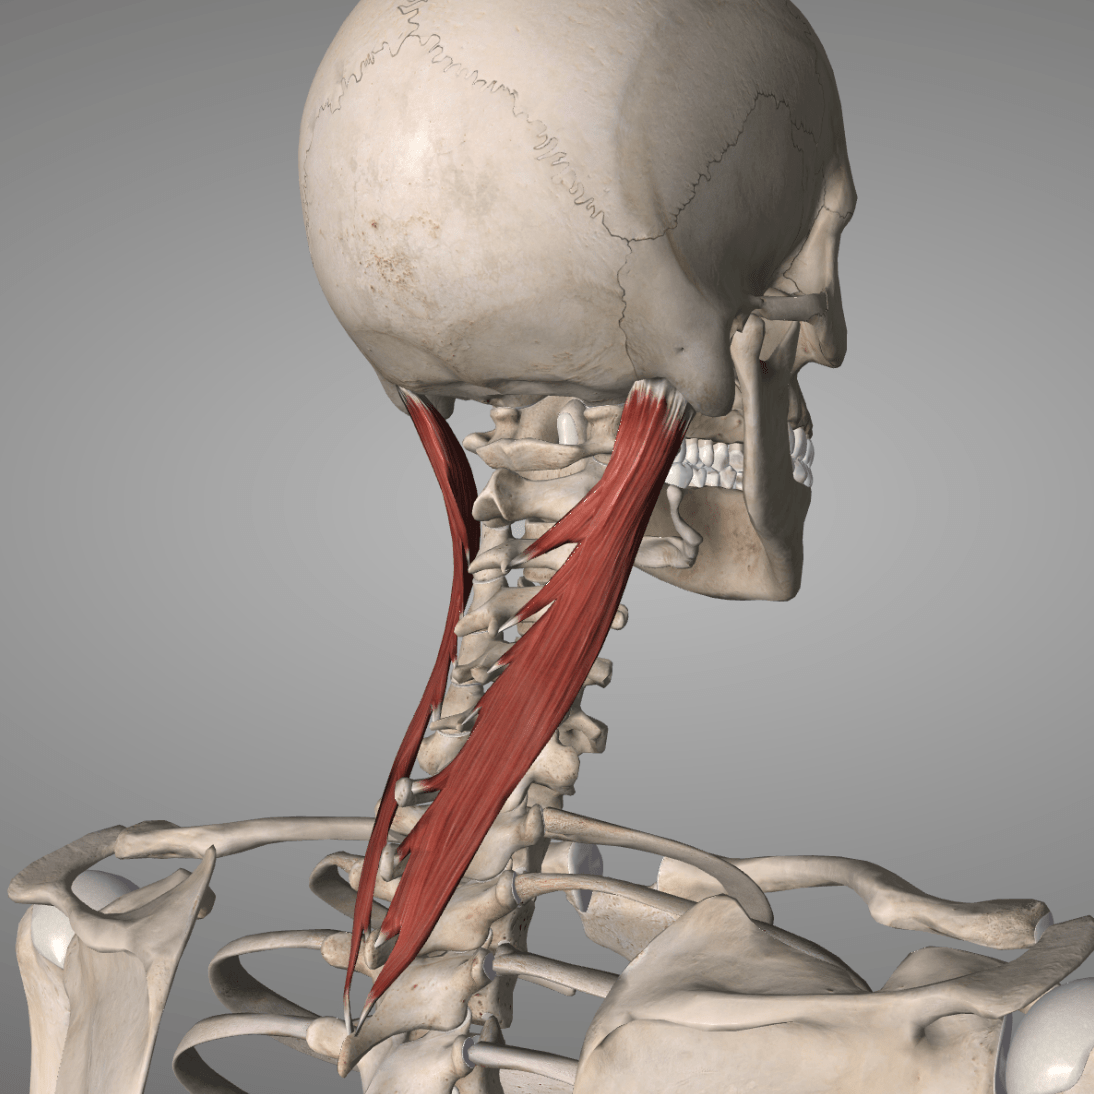 3D illustration of a human skeletal structure with muscles of the neck highlighted.